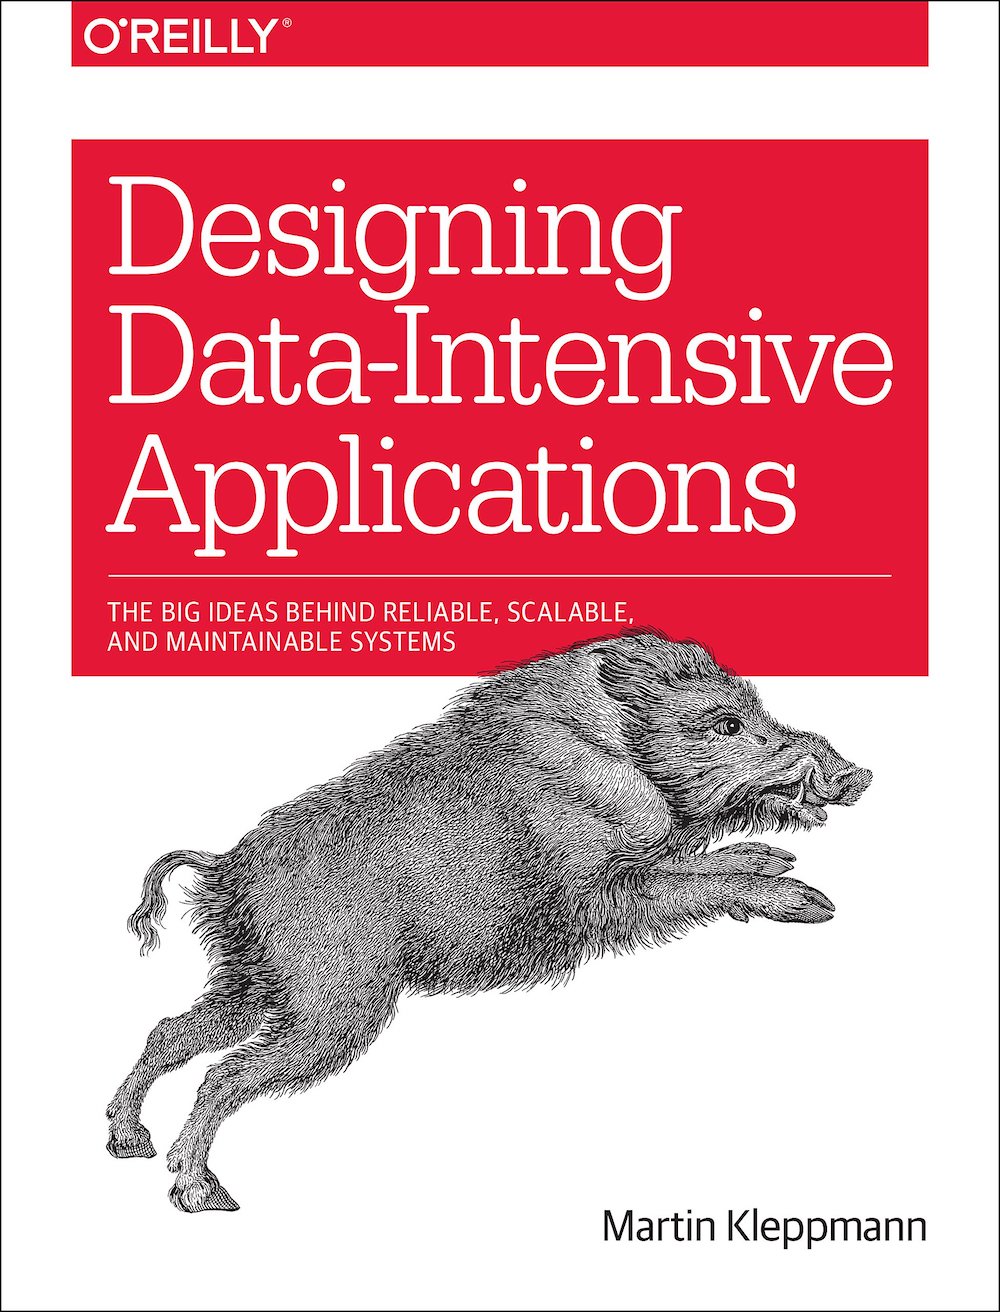 Designing Data-Intensive Applications - Chapter 11 - Stream Processing